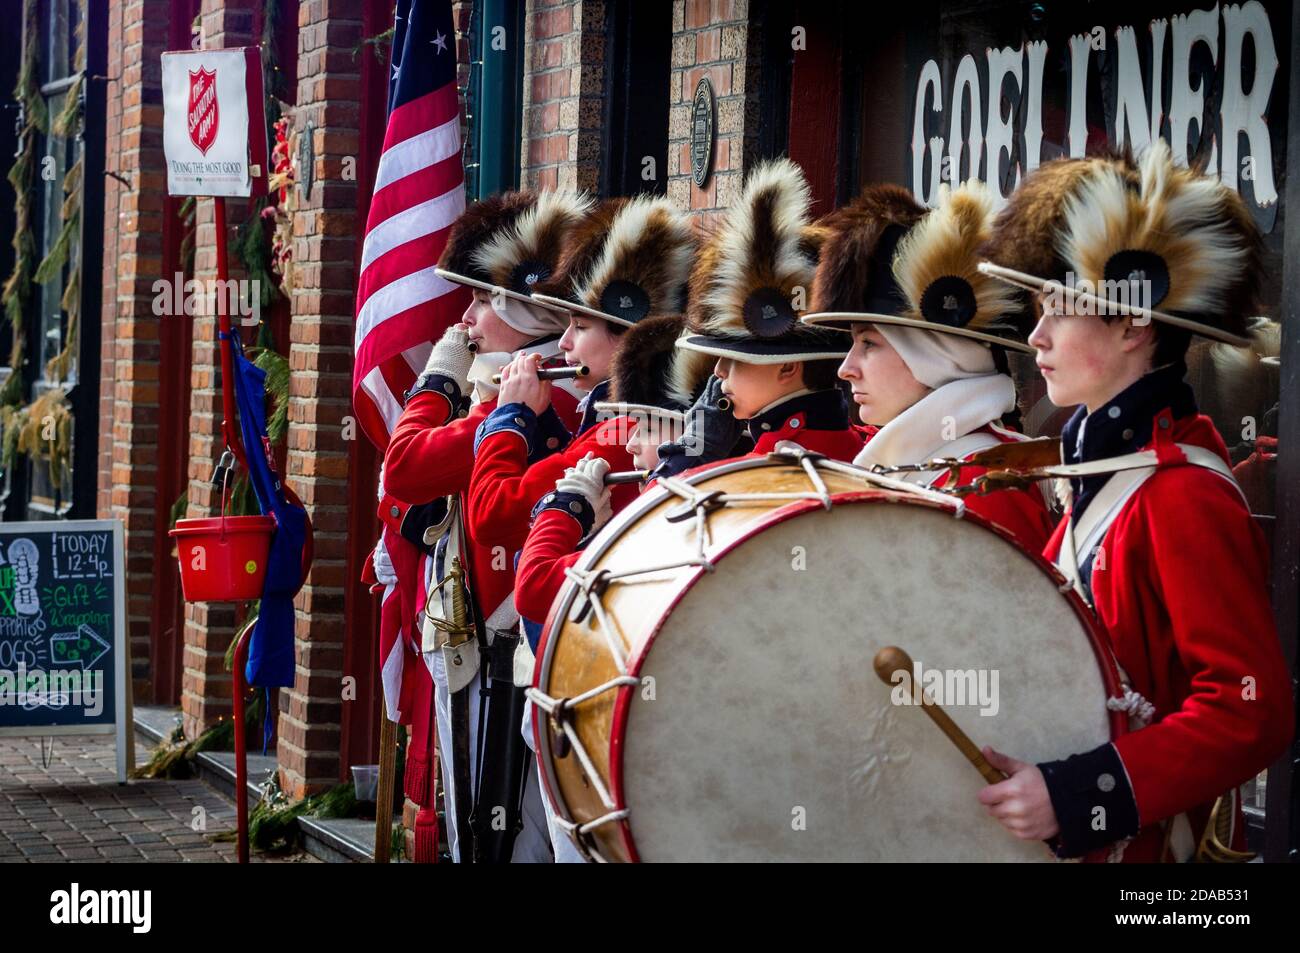 Saint Charles, MO--Dec 19, 2018; Salvation Army actors recreate historic Fife and Drum corp band in colonial dress near collection kettle. Stock Photo